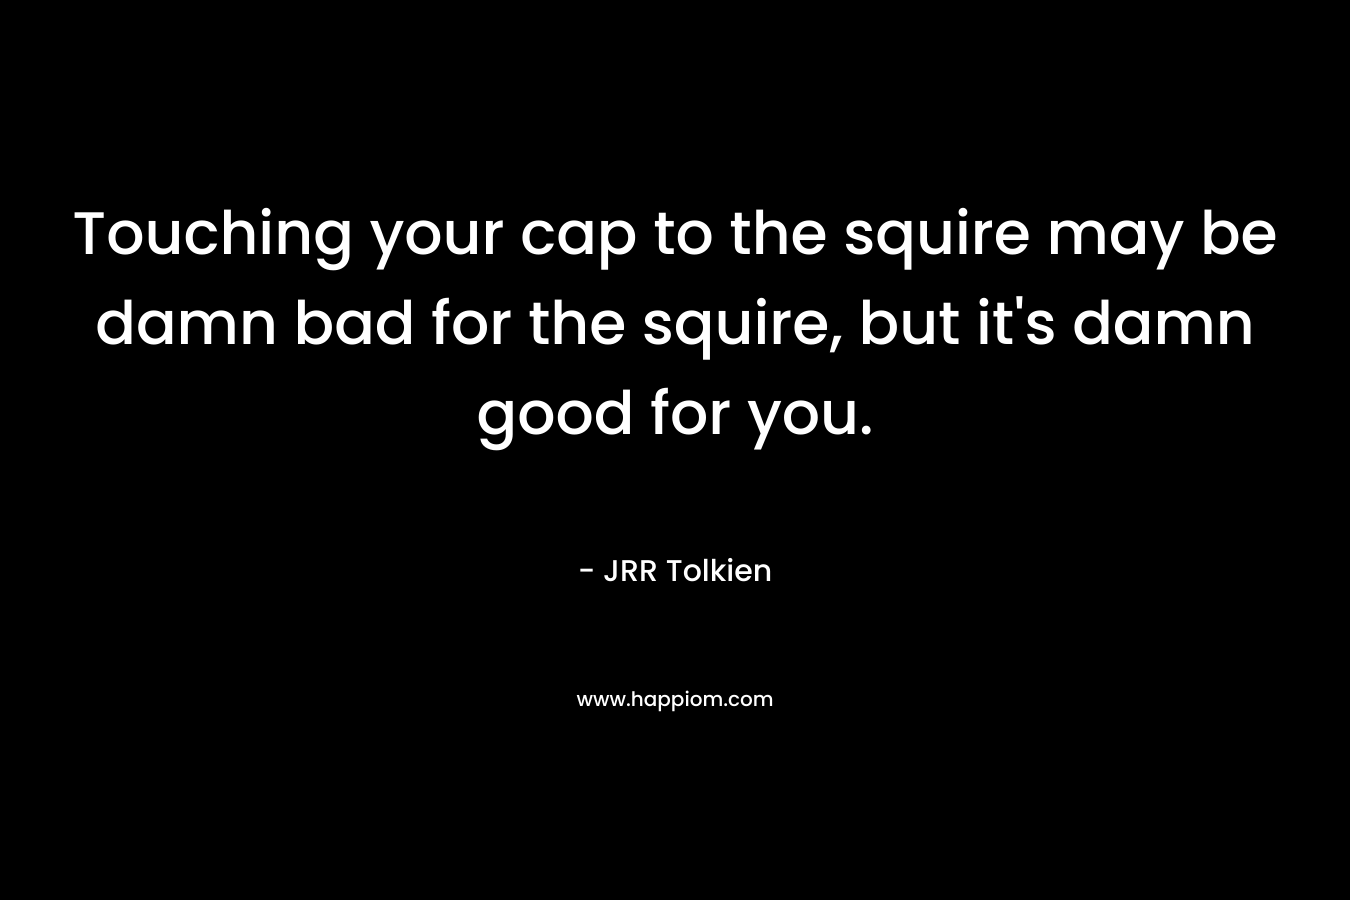 Touching your cap to the squire may be damn bad for the squire, but it's damn good for you.